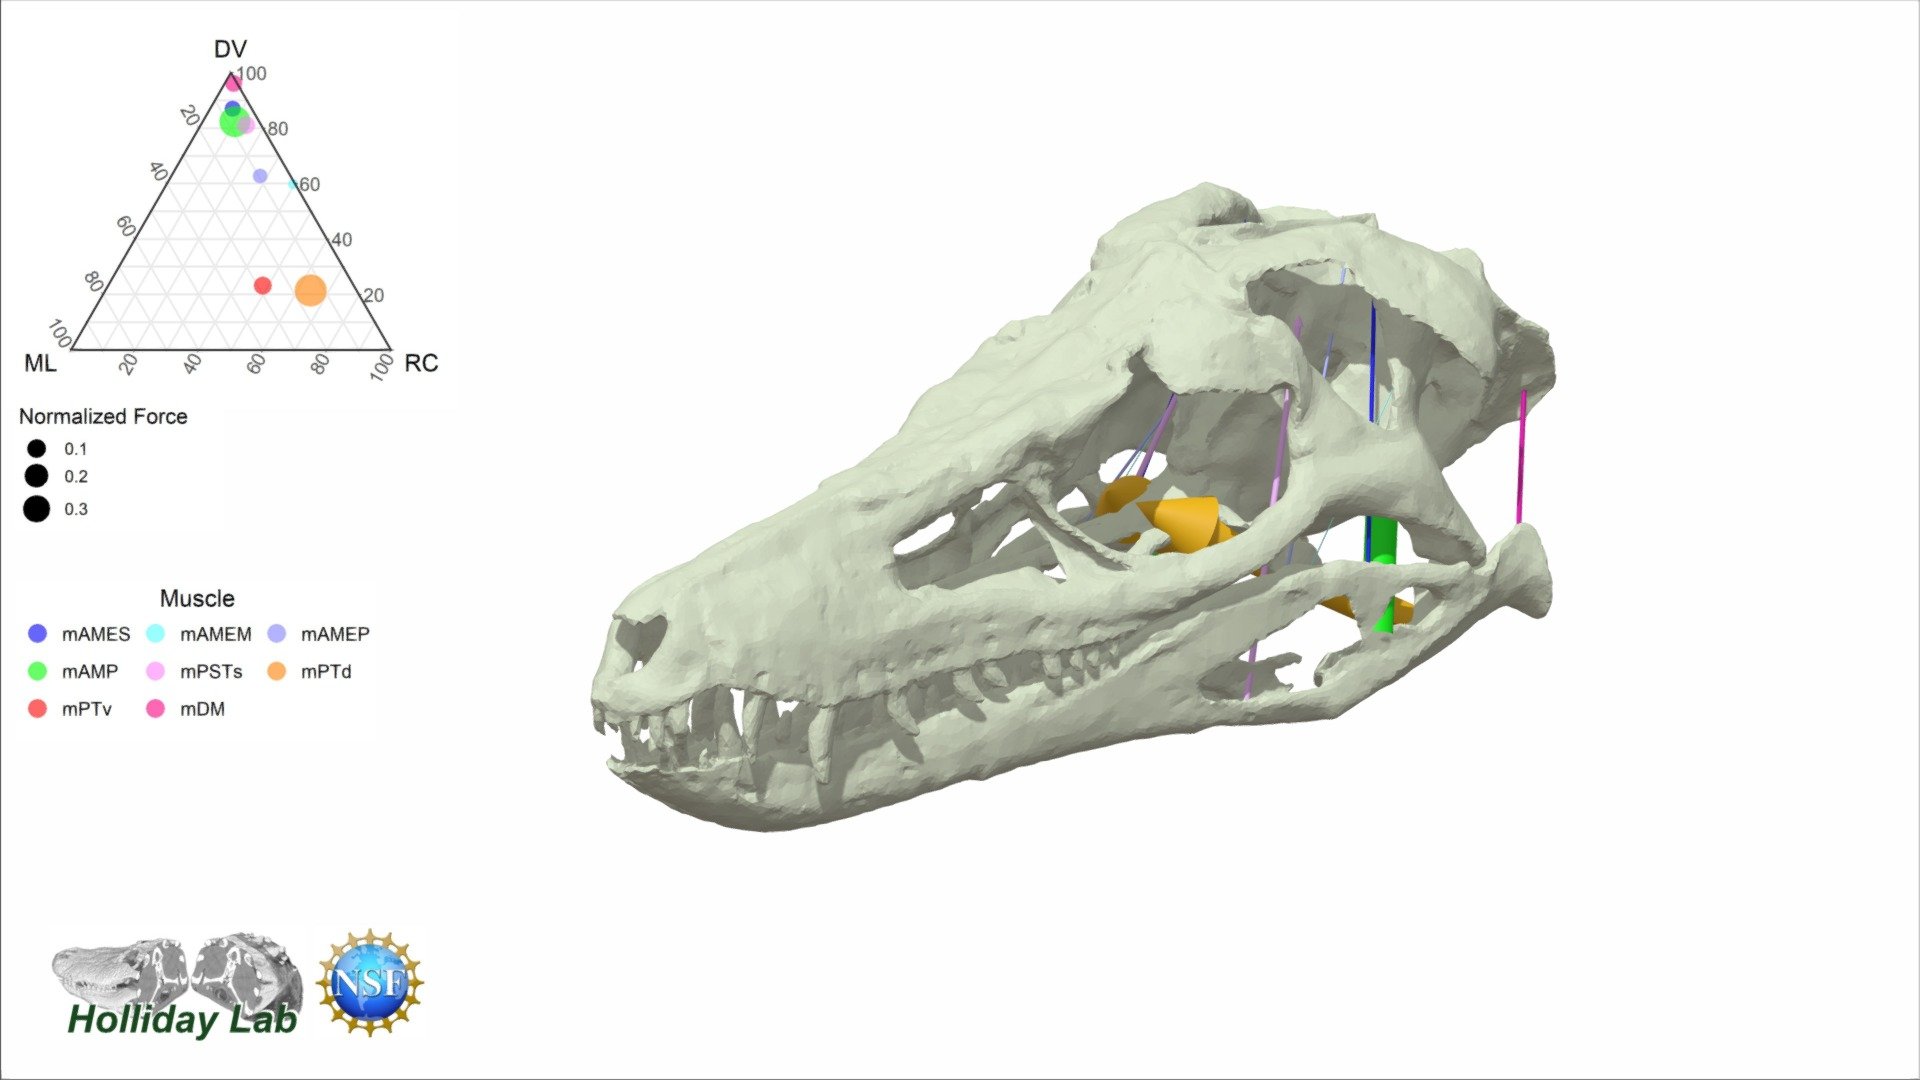 This 3D model of the terrestrial, predatory Sphenosuchian Junggarsuchus sloani (IVPP V14010), from the Middle Jurassic Shishugou Formation of Xinjiang, China, has largely vertically oriented temporal muscles like many of its crocodylomorph ancestors.  Read more on how the evolution of skull shape in crocodilians affected jaw muscle function in Sellers et al (2022) in in Anatomical Record: https://doi.org/10.1002/ar.24912. The original descriptions of this exquisite fossil can be found here: doi:10.1038/nature02802 with thanks to Jim Clark (GWU) and Xu Xing (IVPP) for sharing the data. Thanks to National Science Foundation 1631684 for supporting the work 3d model